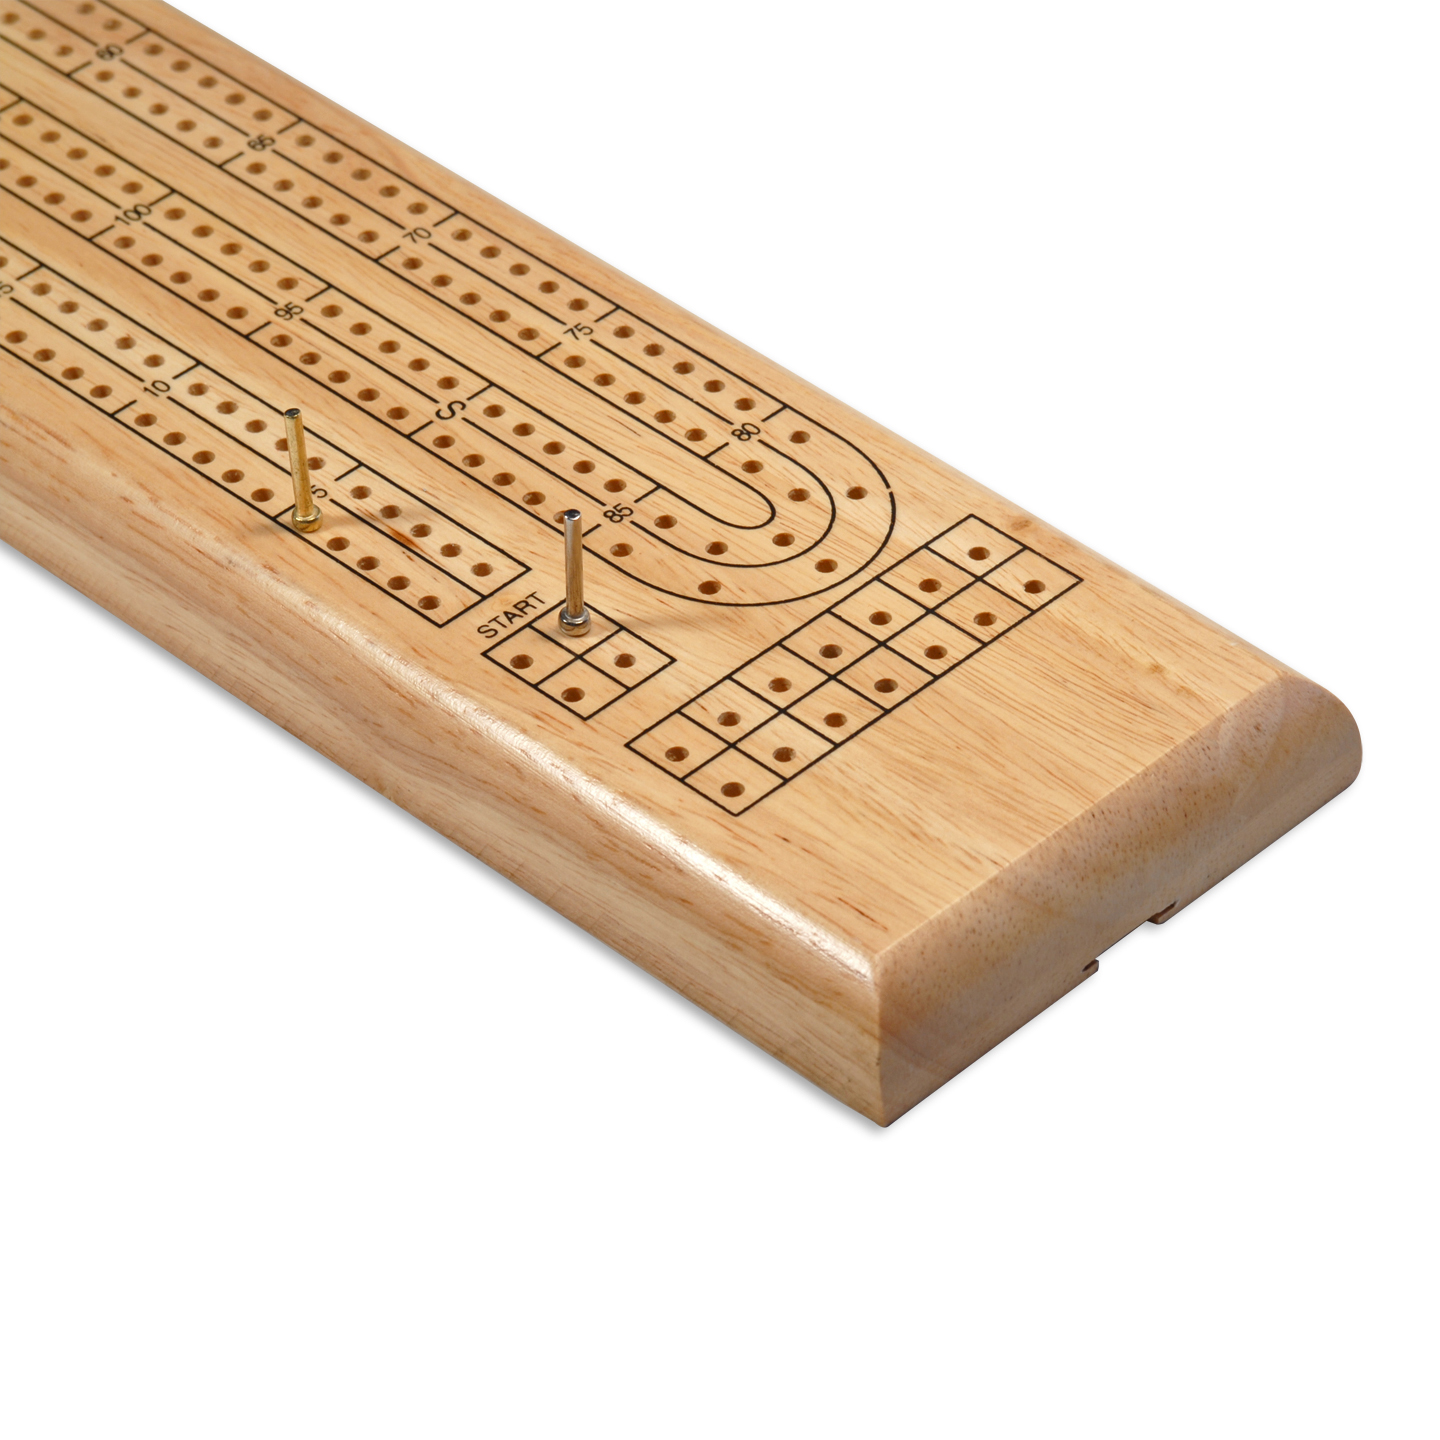 Luxury 3 Track White Topped Wooden Cribbage Board with Drawers 2 Decks and Pegs 